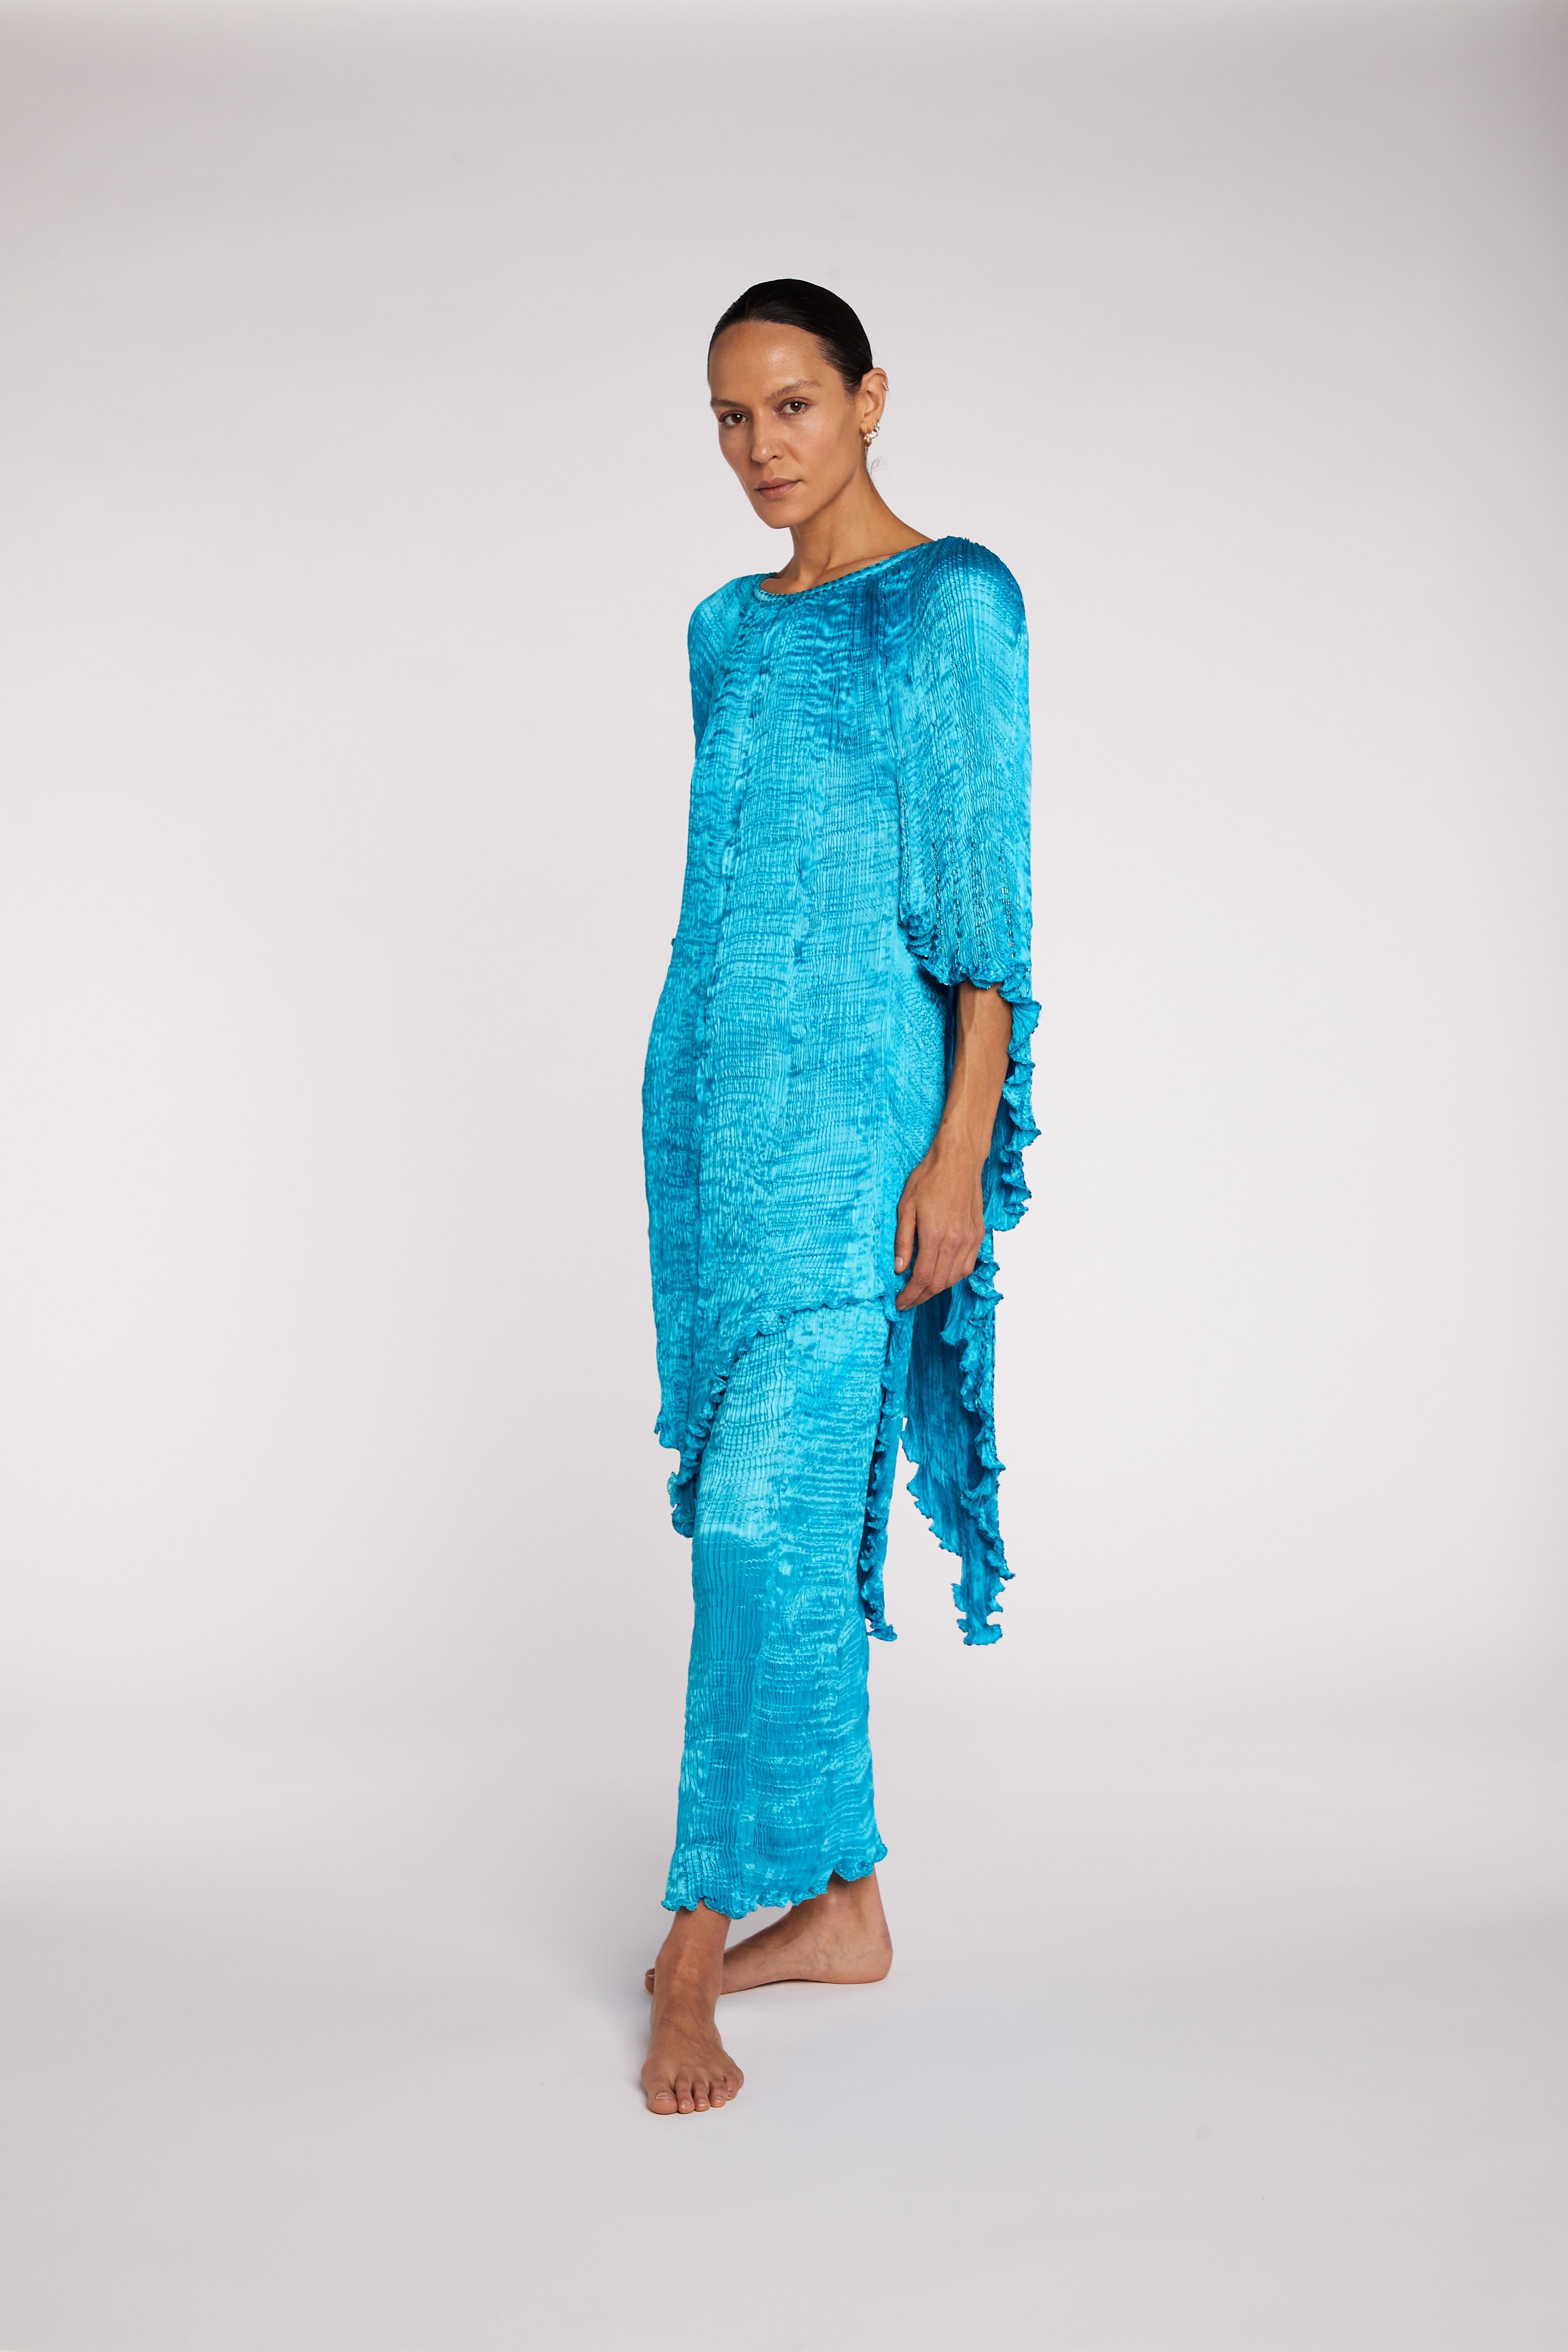 Patricia Lester 'Fortuny' Pleated Hand Made One Of A Kind Turquoise Ensemble 2